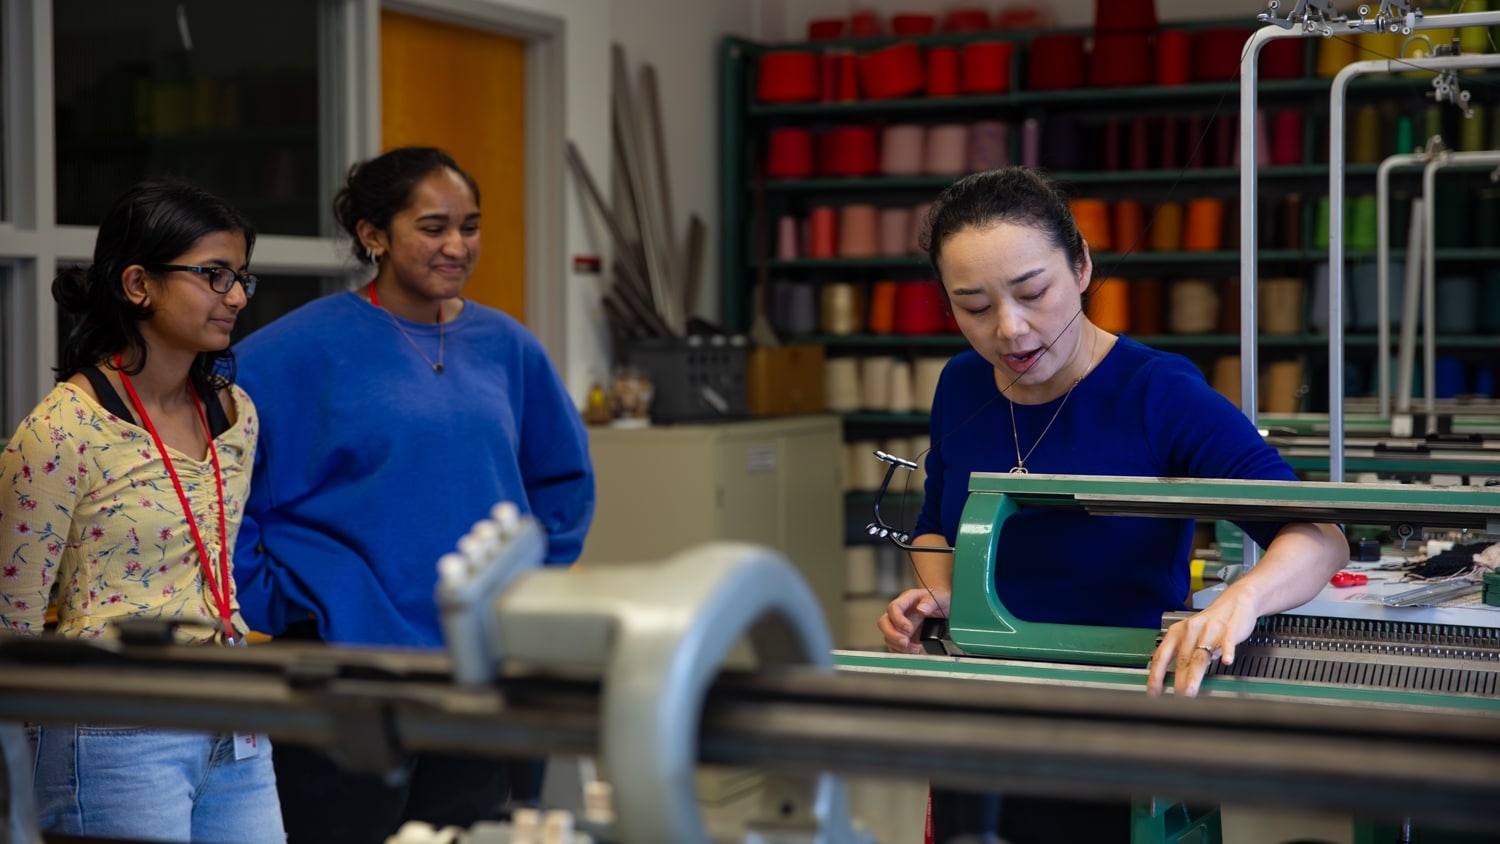 Xiaomeng Fang stands behind a knitting machine and points to a certain part of the machine to show two students to her left how it works.